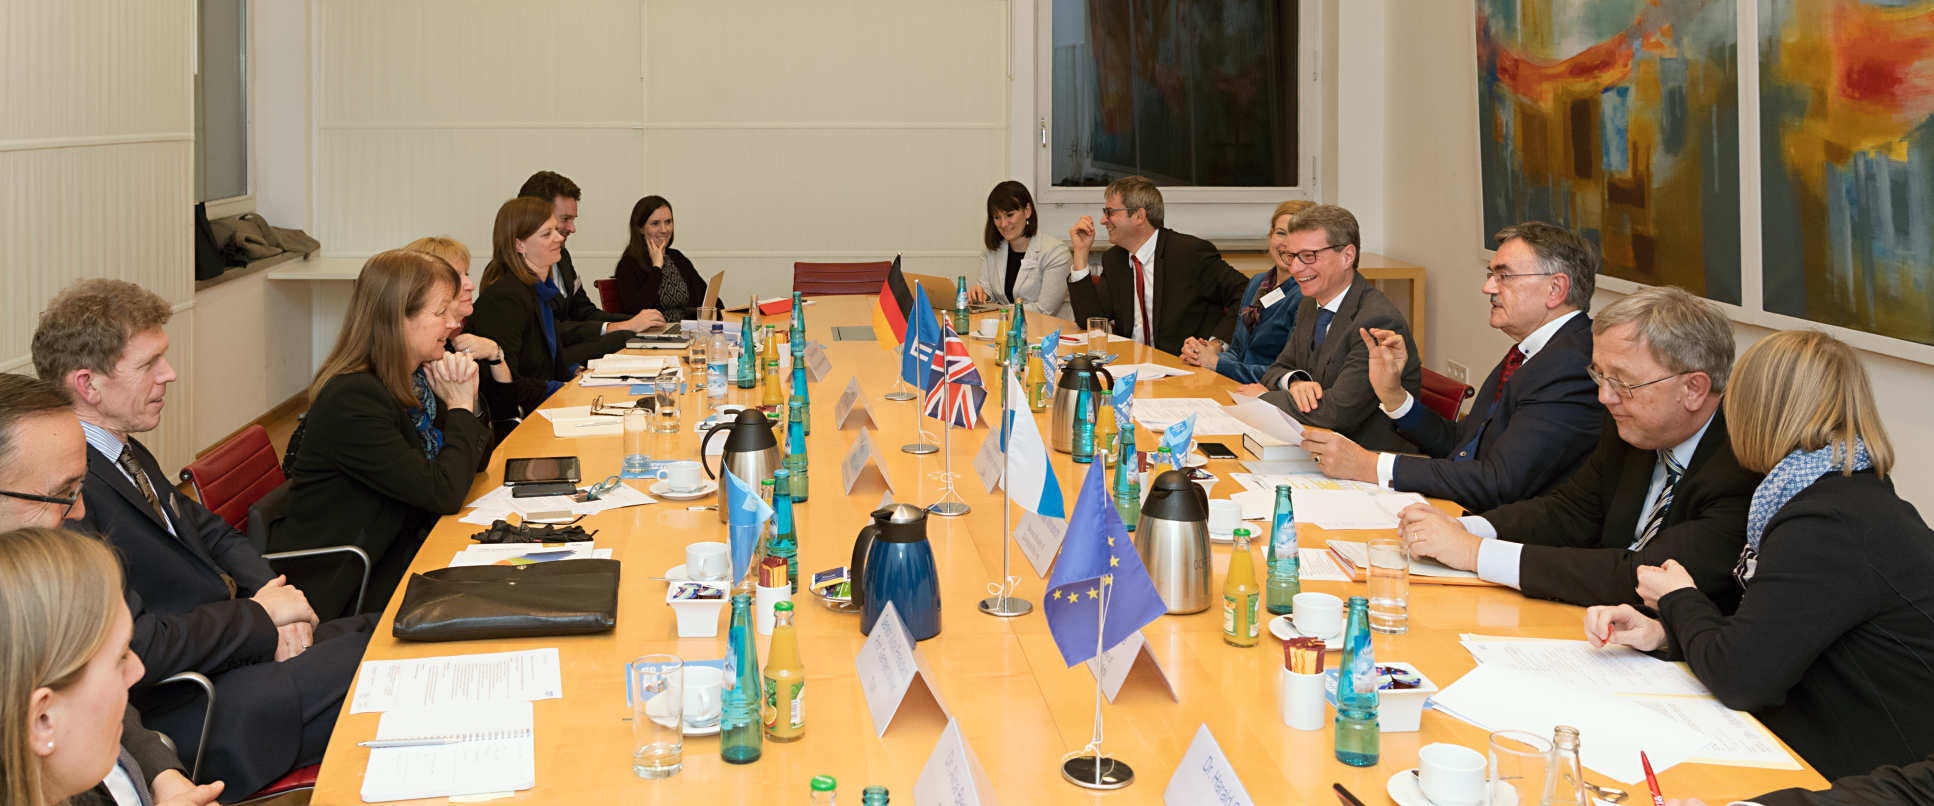 Imperial and TUM leaders met to advance their partnership in Munich earlier this month